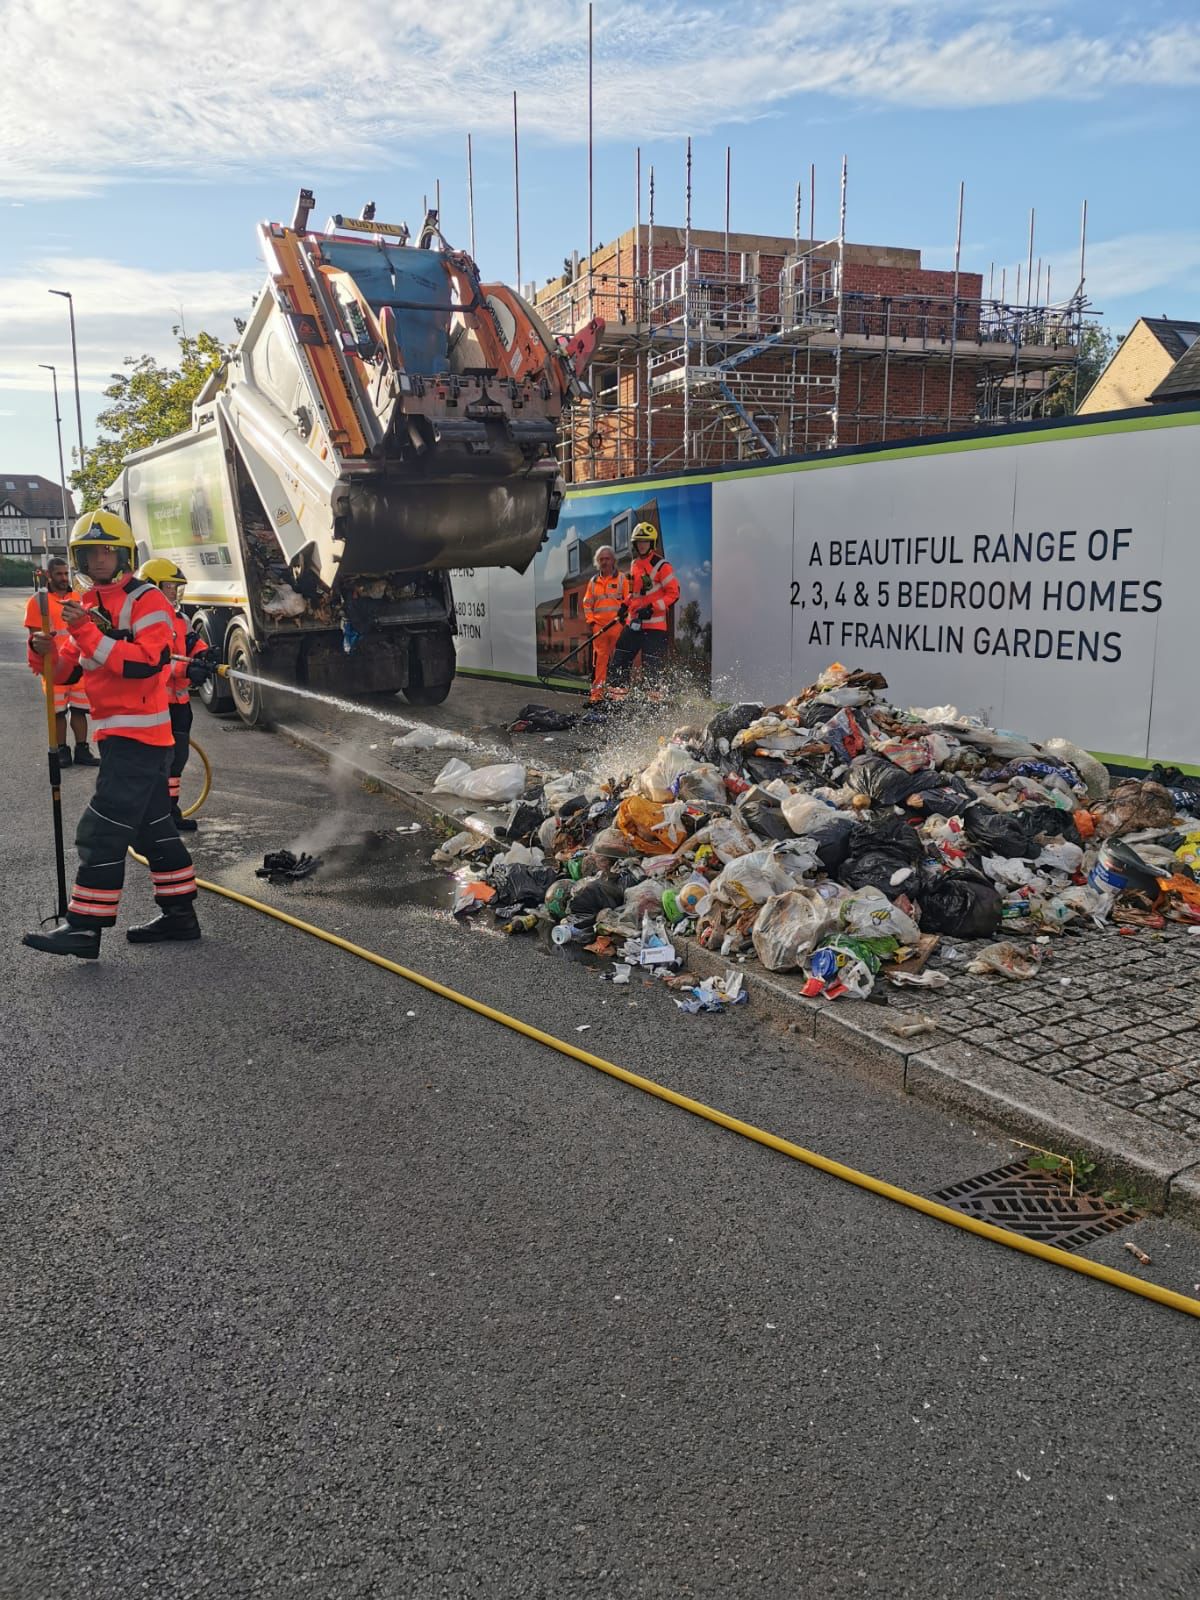 Firefighters putting out a fire involving refuse from a lorry.